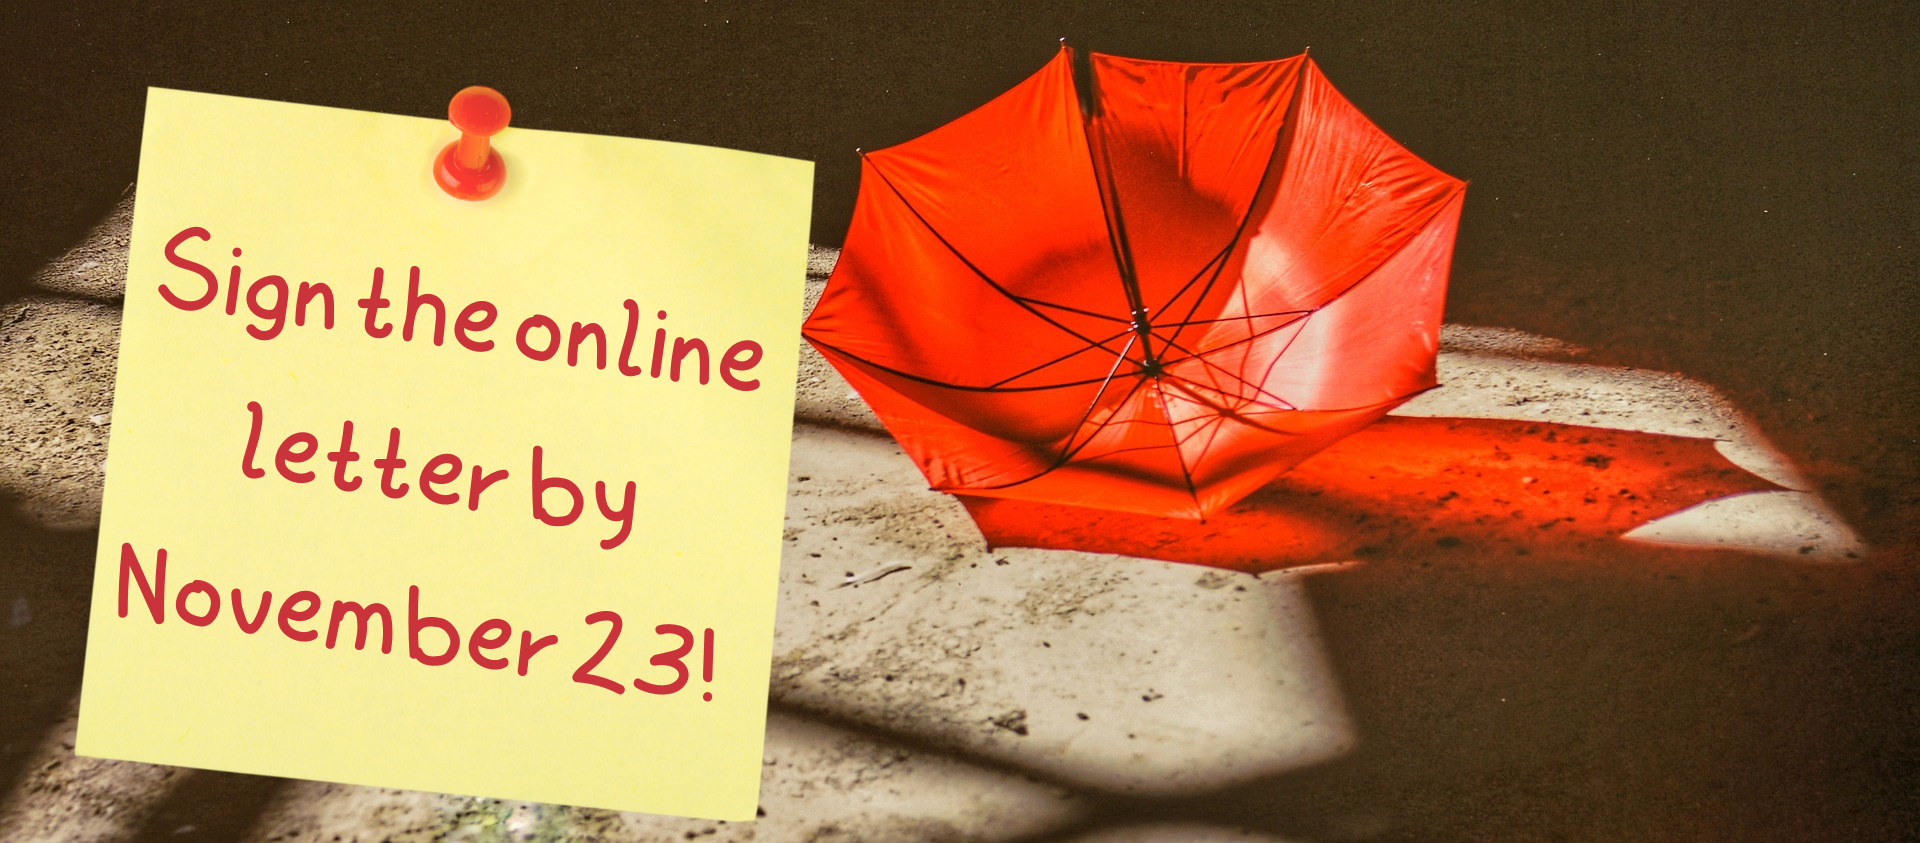 Open red umbrella on sand, with sticky note saying "Sign the online letter by November 23!"